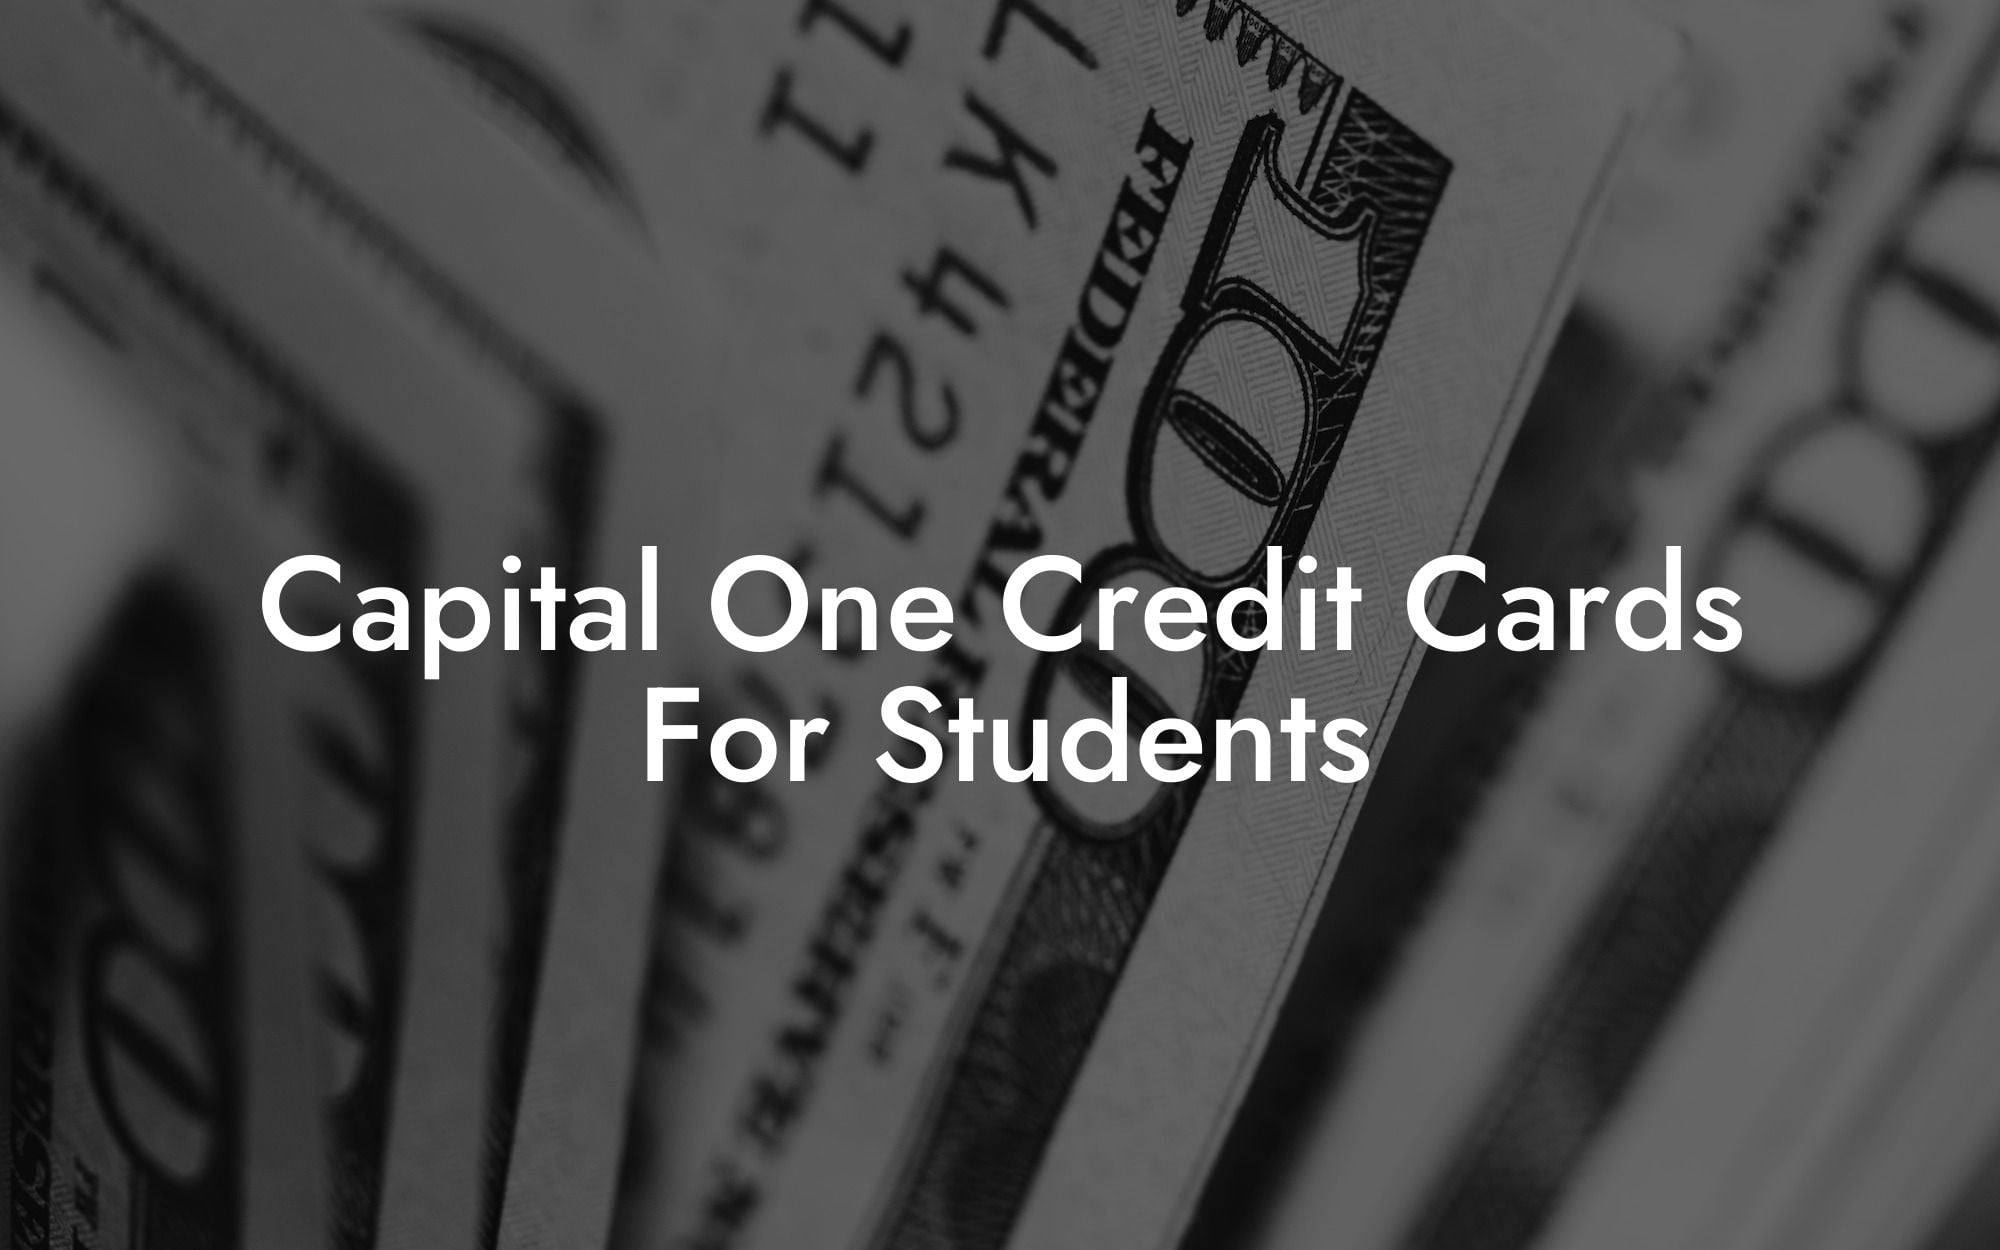 Capital One Credit Cards For Students